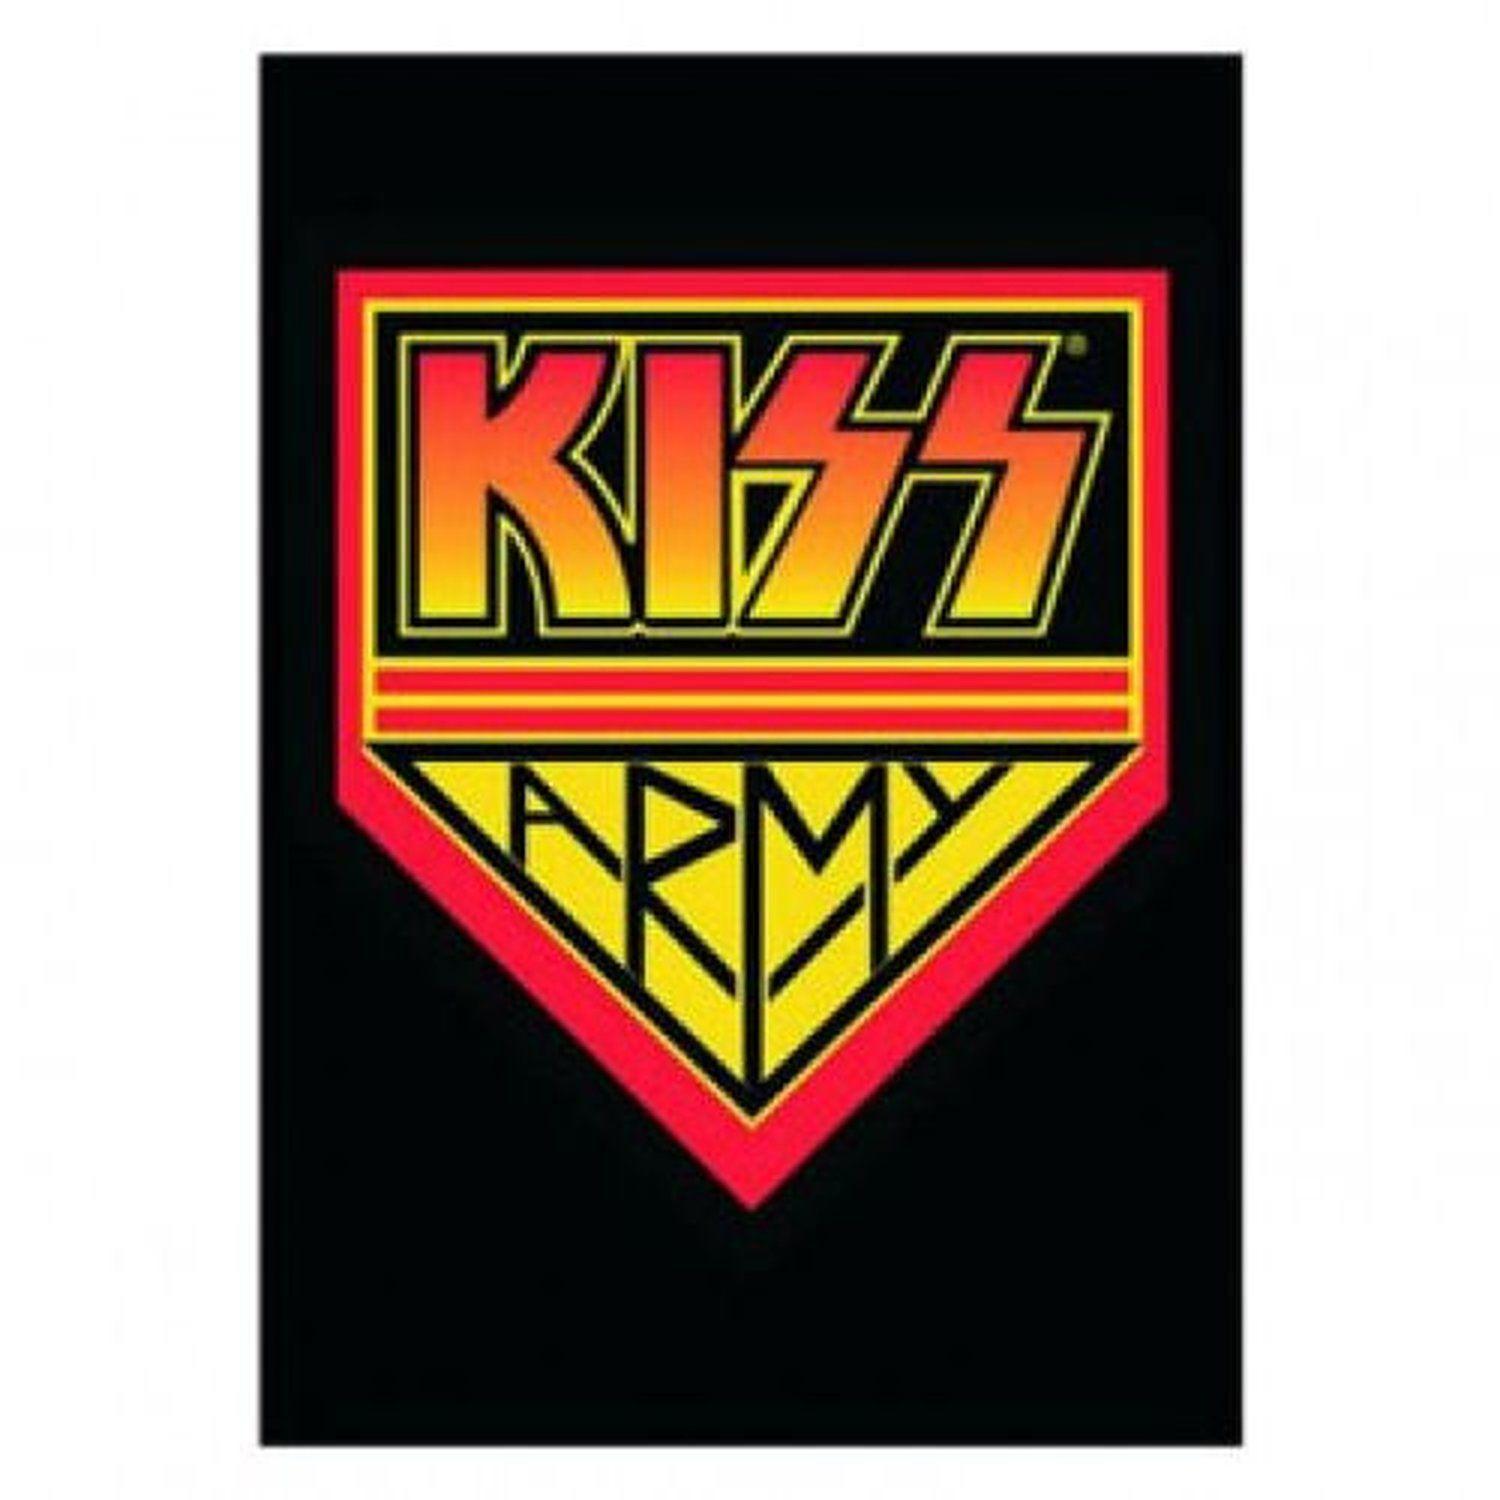 Kiss Army Logo - KISS Army Postcard Band Logo Image Picture 100% Official Licensed